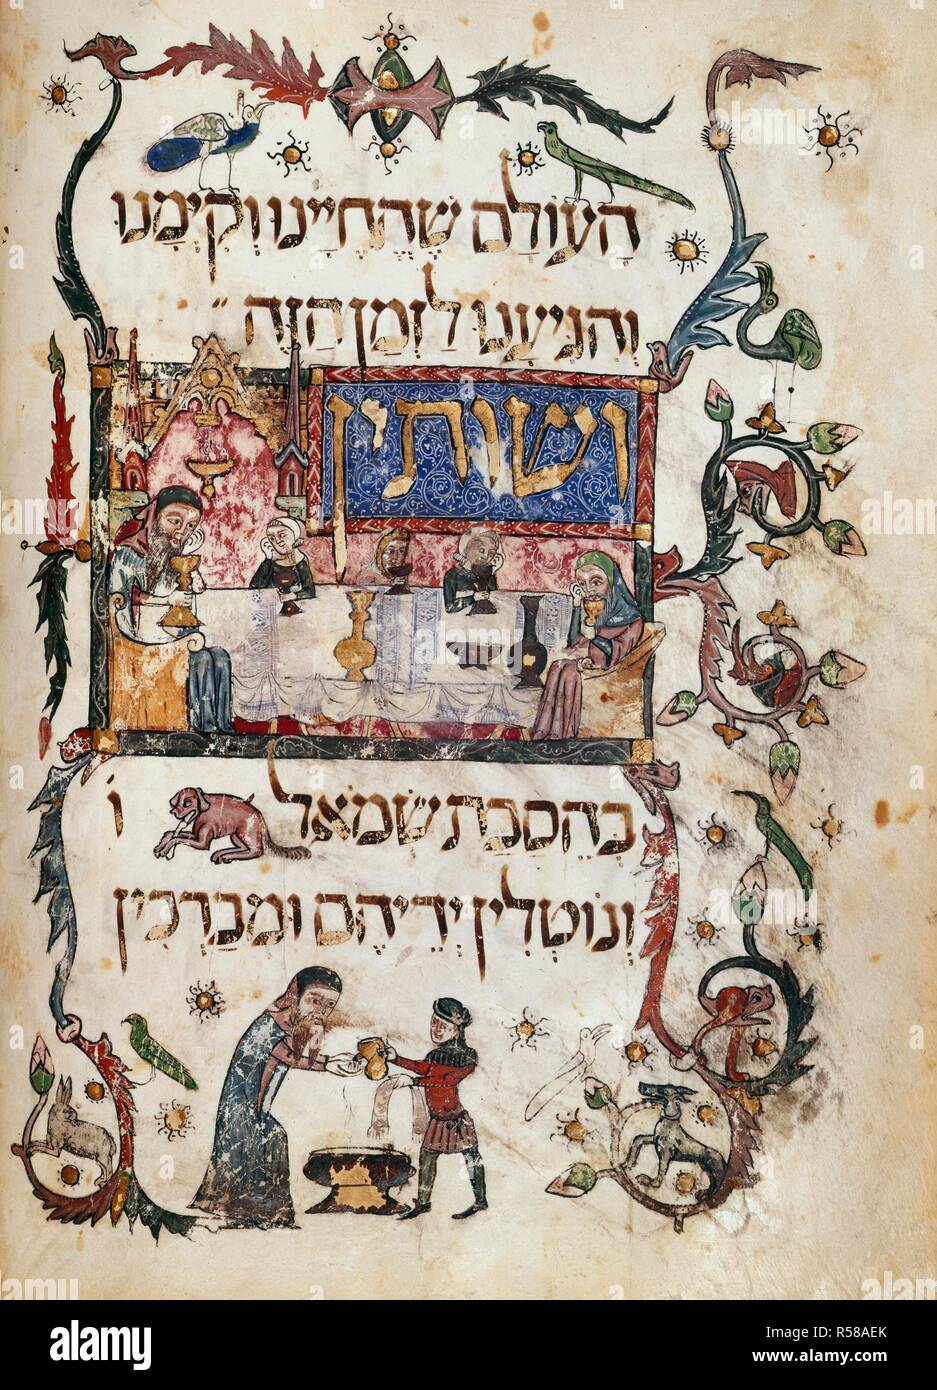 Passover scene. Barcelona Haggadah. Catalonia, 14th century. A family celebrating the feast of Passover. Vellum manuscript.  Image taken from Barcelona Haggadah.  Originally published/produced in Catalonia, 14th century. . Source: Add. 14761, f.19v. Language: Hebrew. Stock Photo